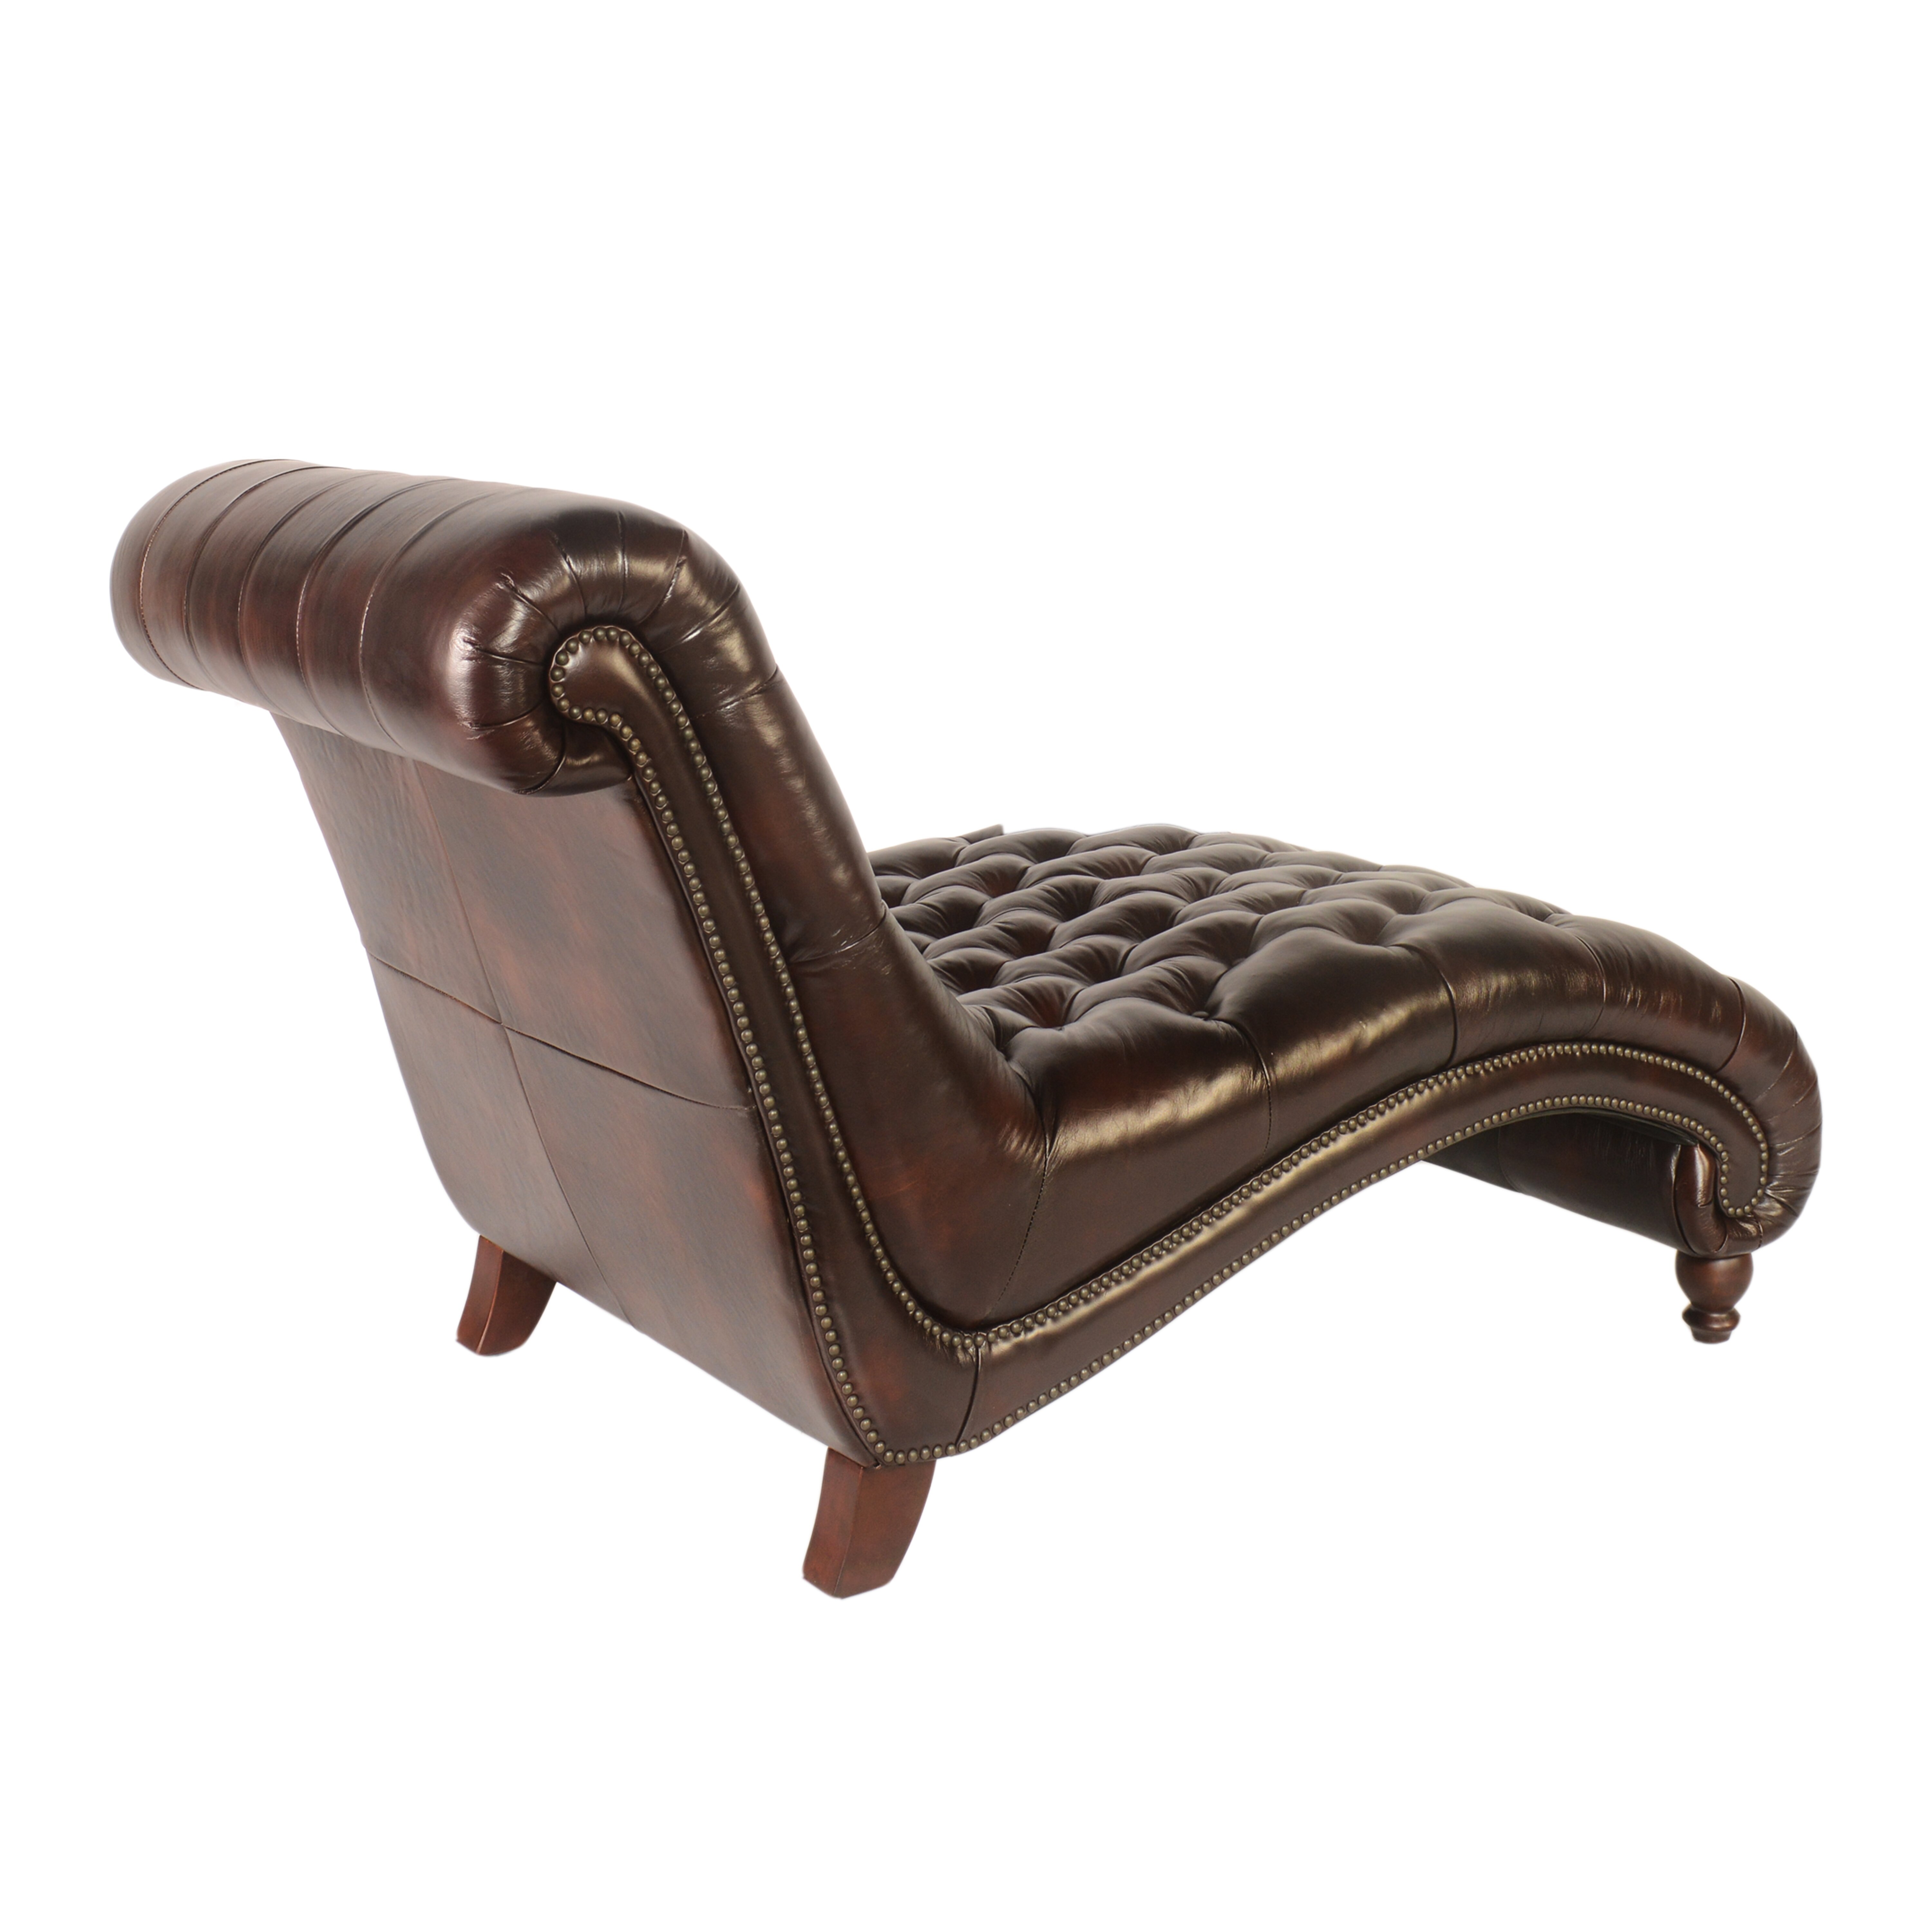 Lazzaro Leather Chaise Lounge And Reviews Wayfair 7026